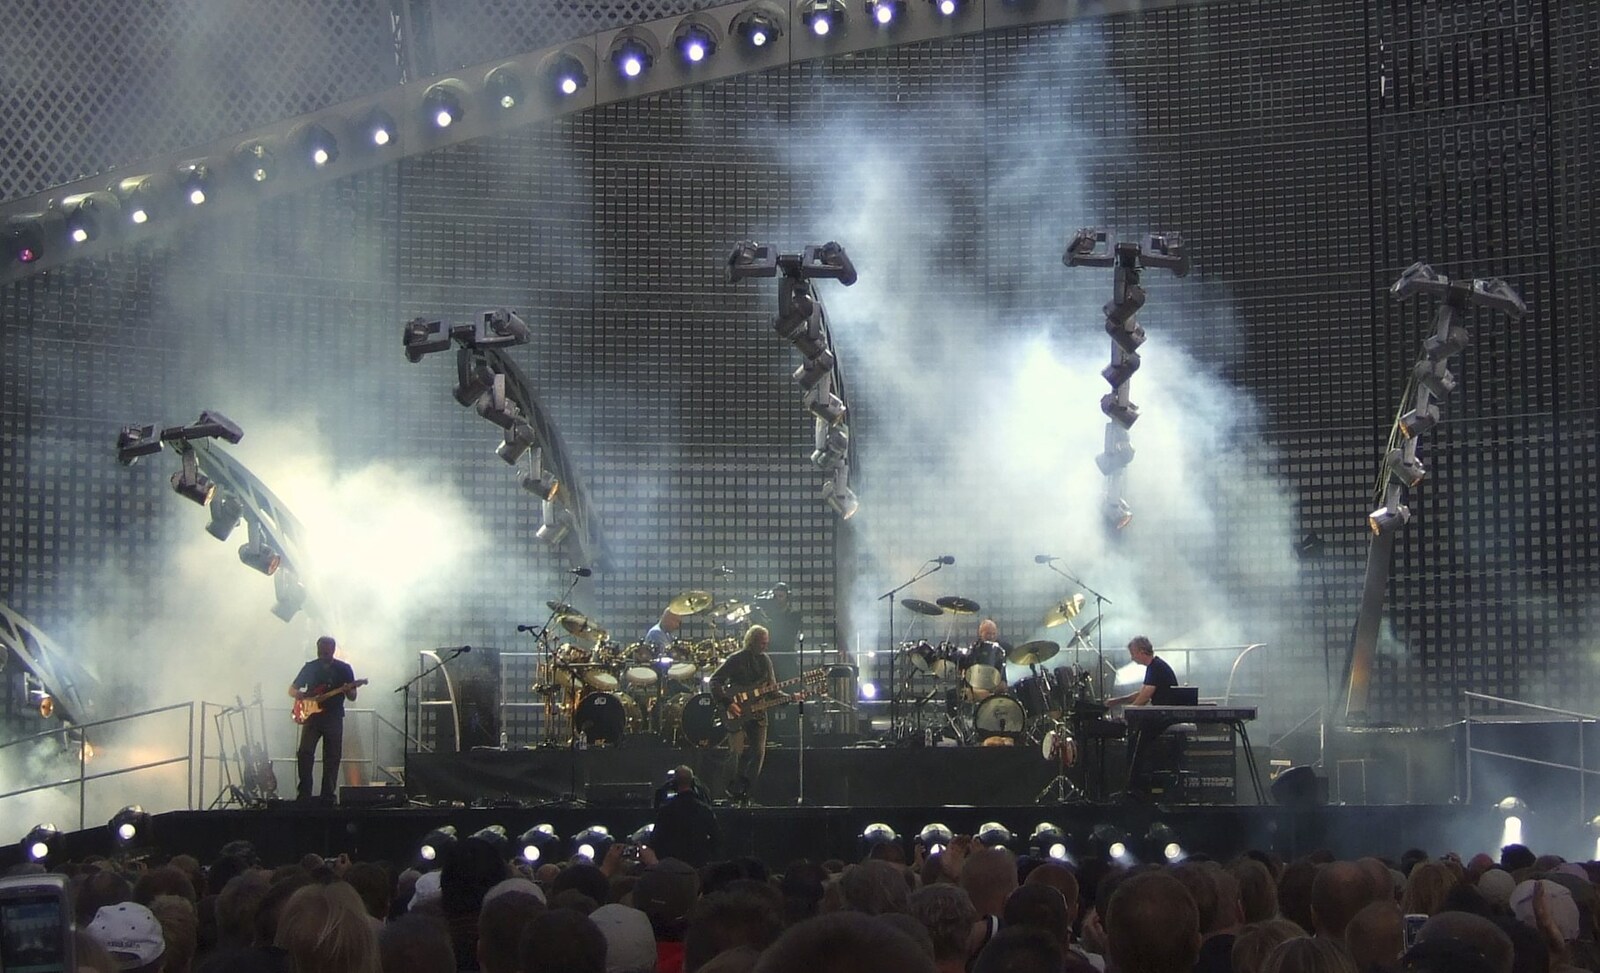 Genesis in Concert, and Suomenlinna, Helsinki, Finland - 11th June 2007: The stage fills with dry ice